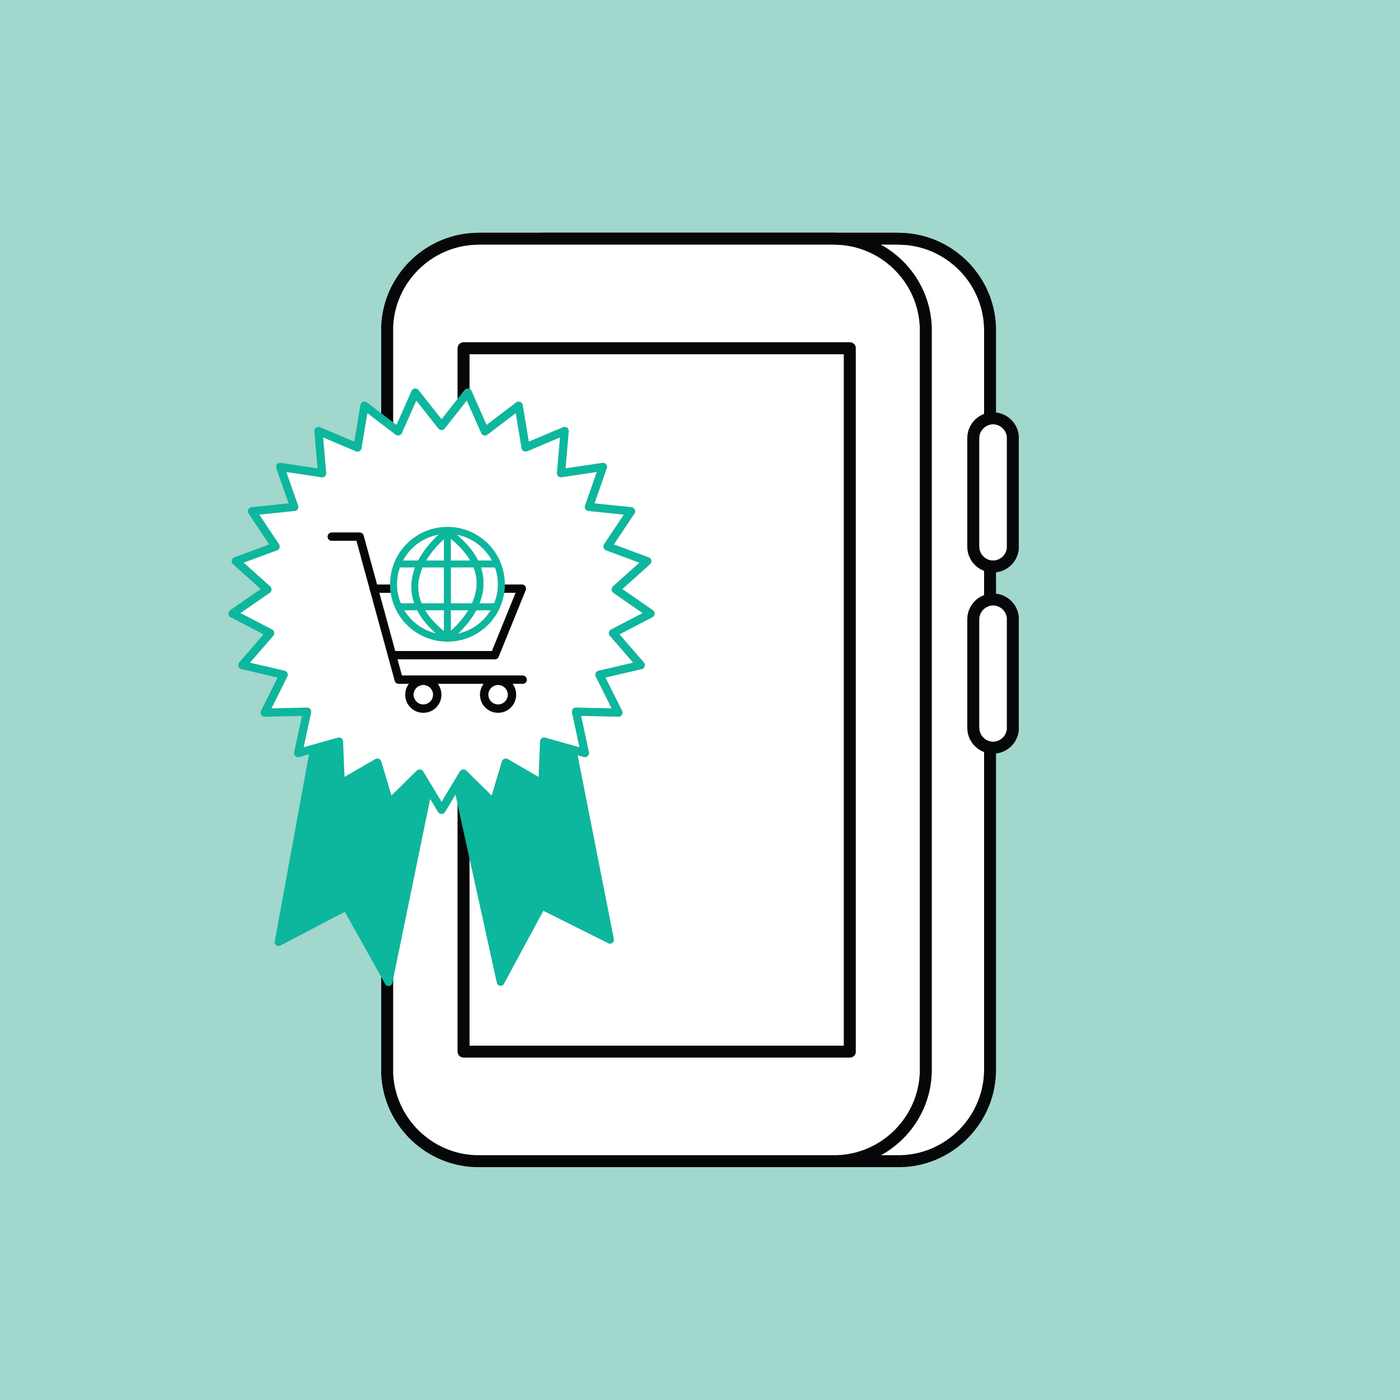 teal background with a phone in the center and a shopping cart icon in a badge next to it